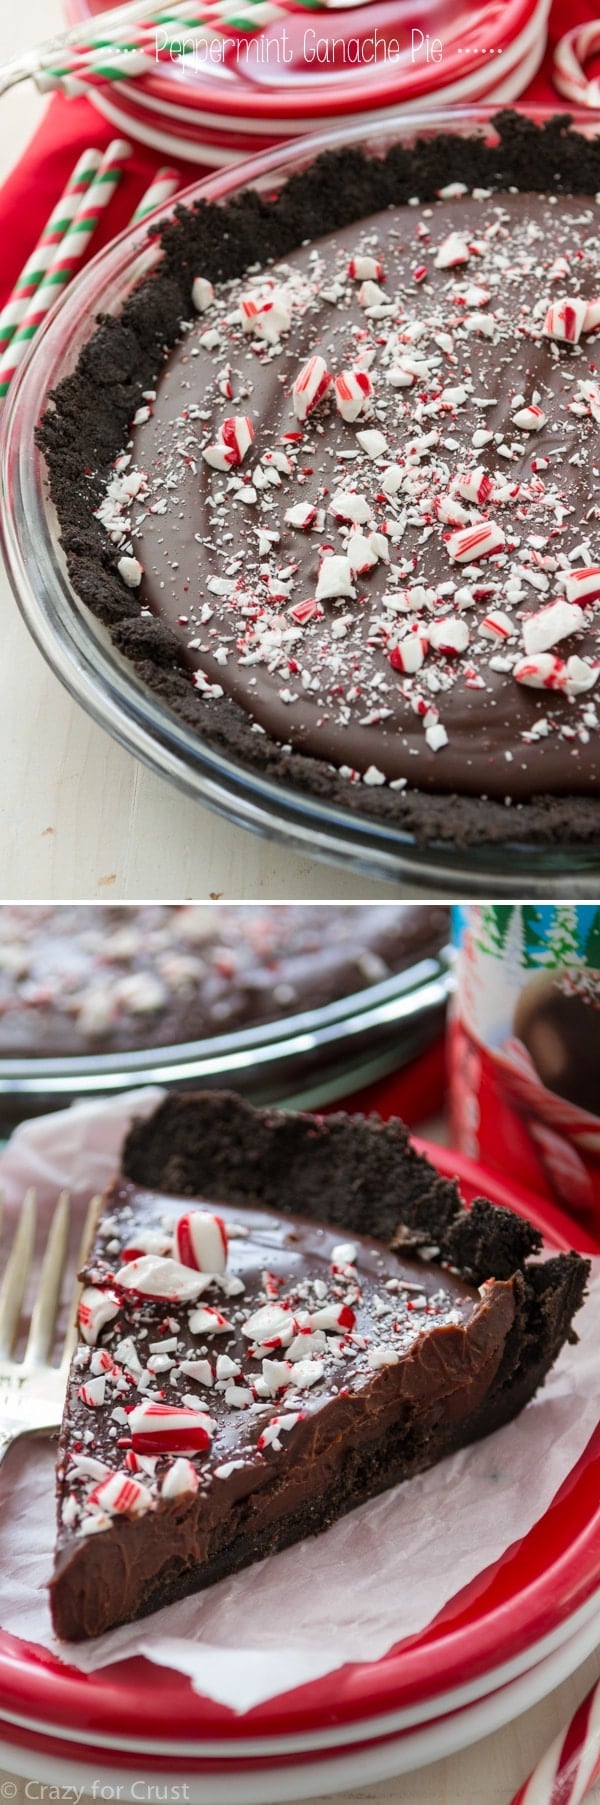 Peppermint Ganache Pie with an Oreo Crust and filled with chocolate ganache that's been flavored with peppermint!